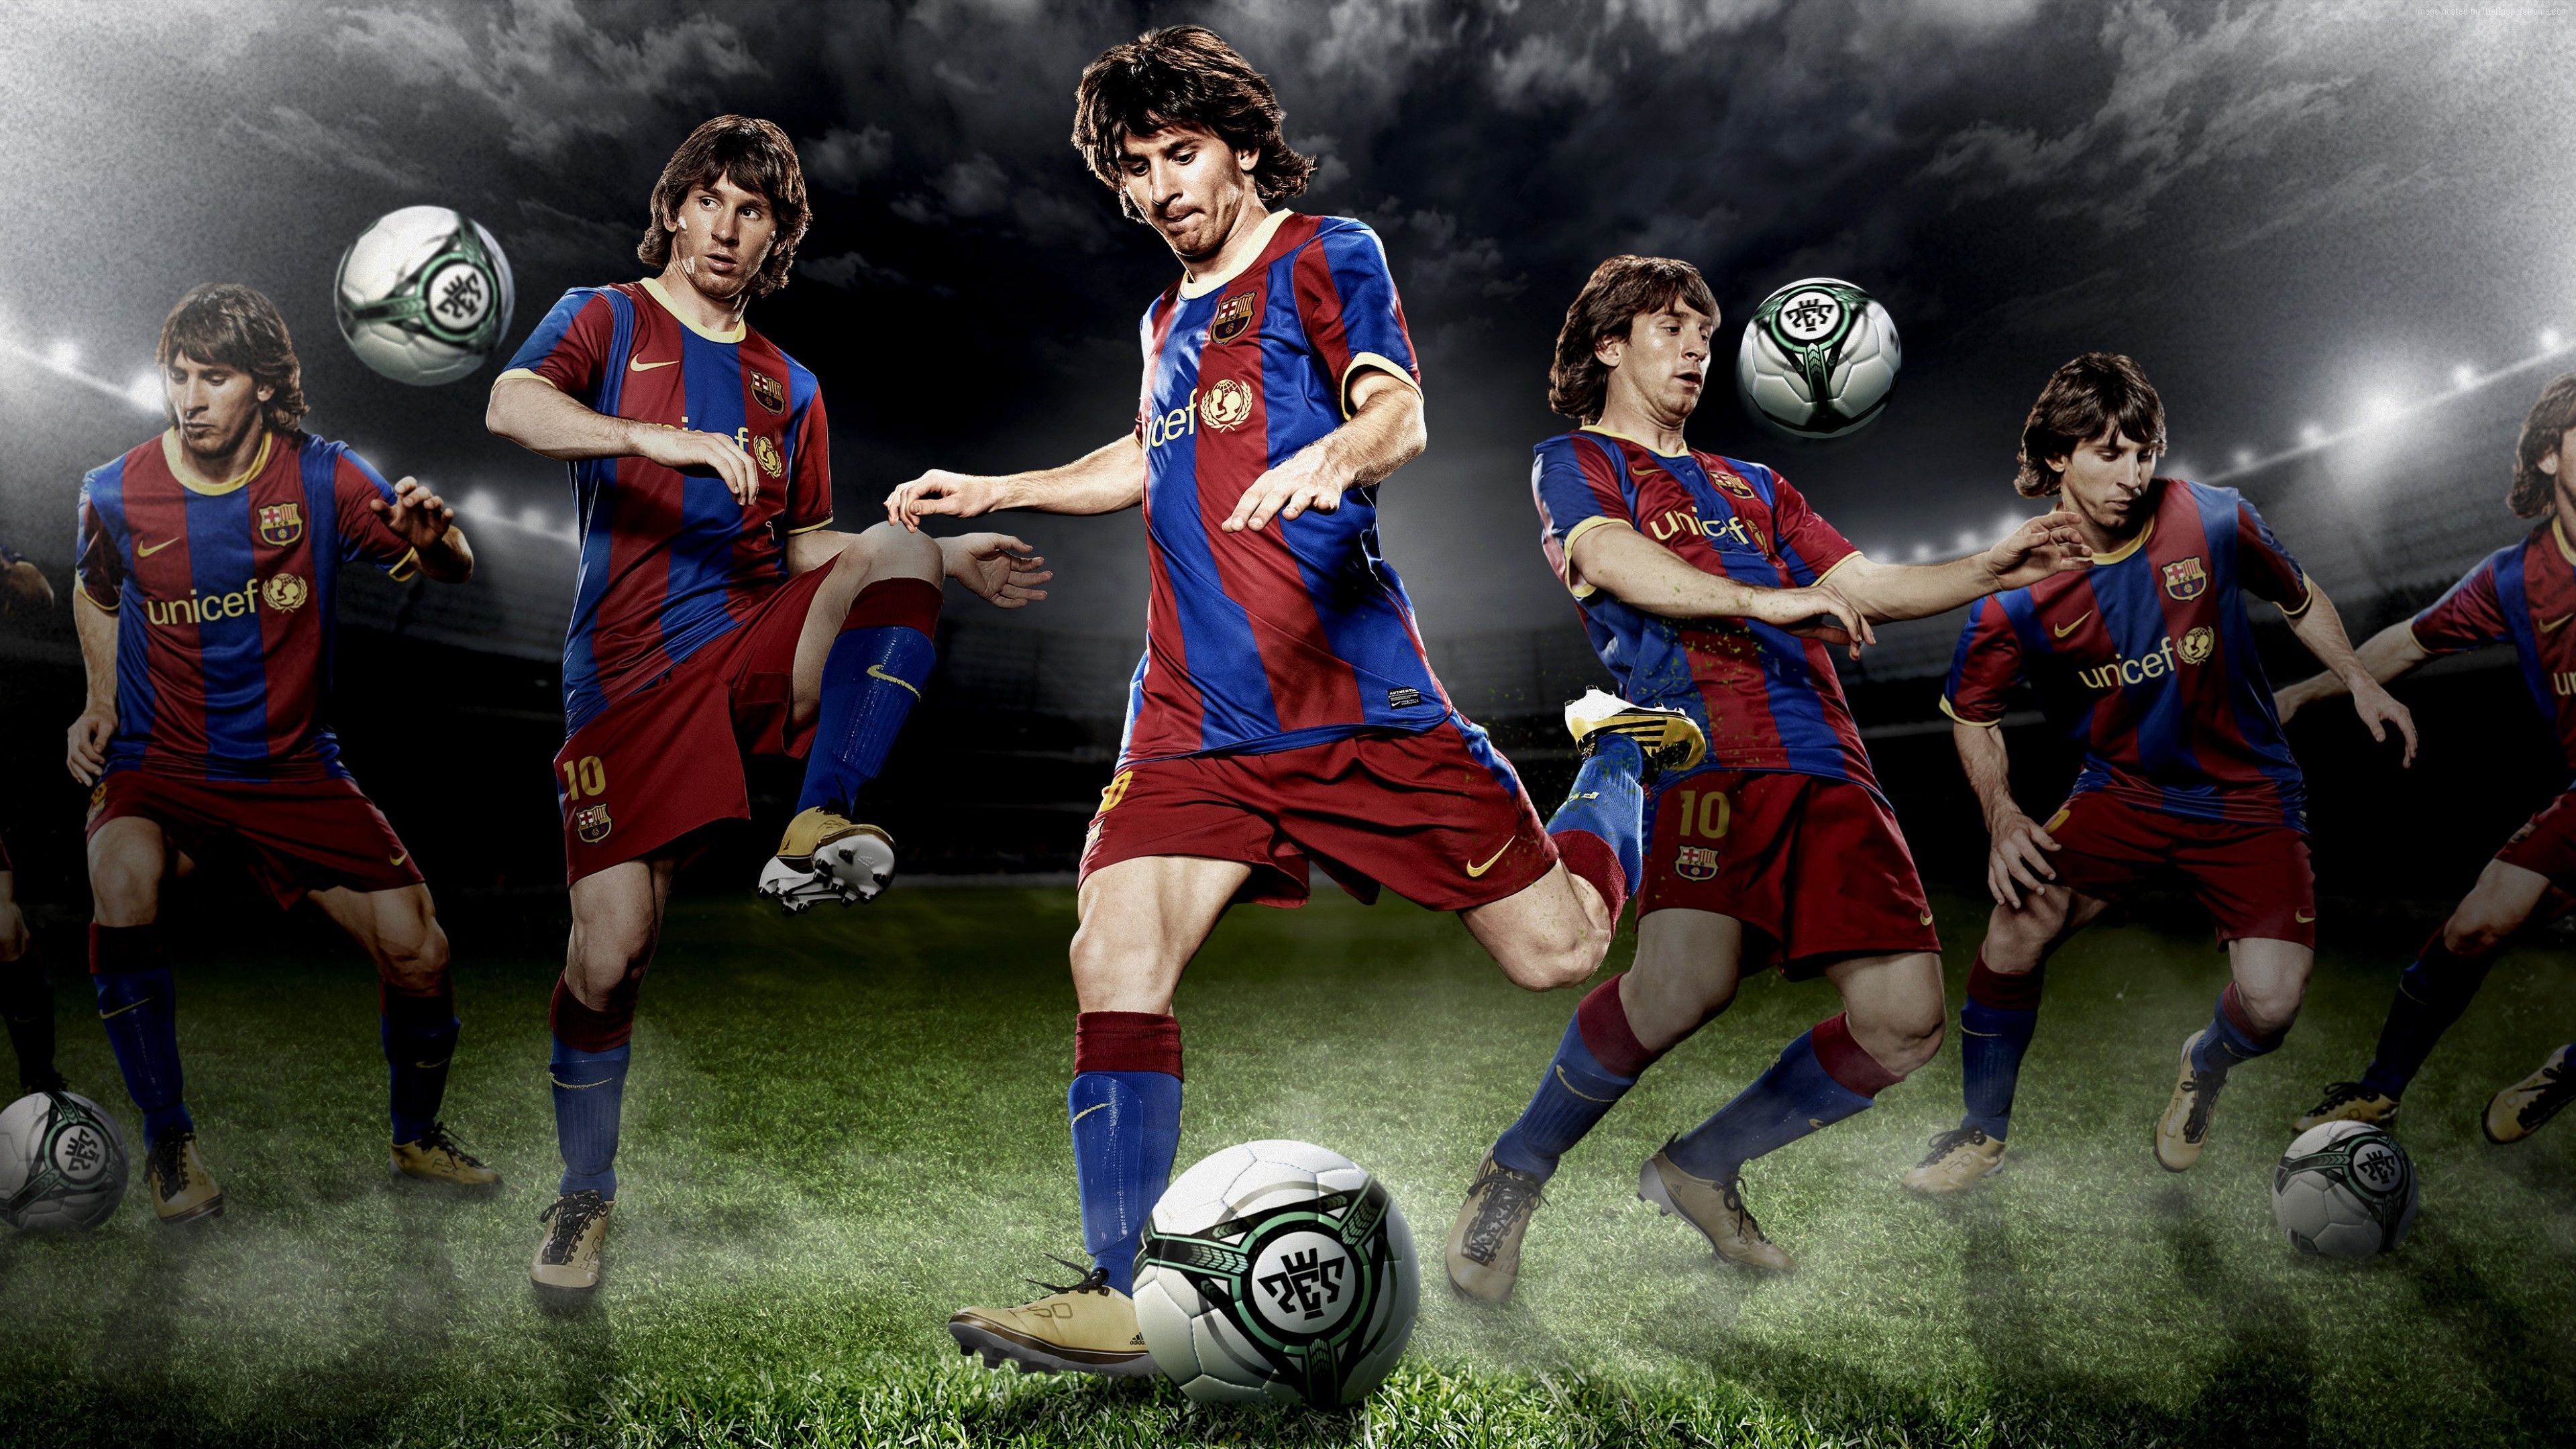 Wallpaper Football, Lionel Messi, soccer, The best players 2015